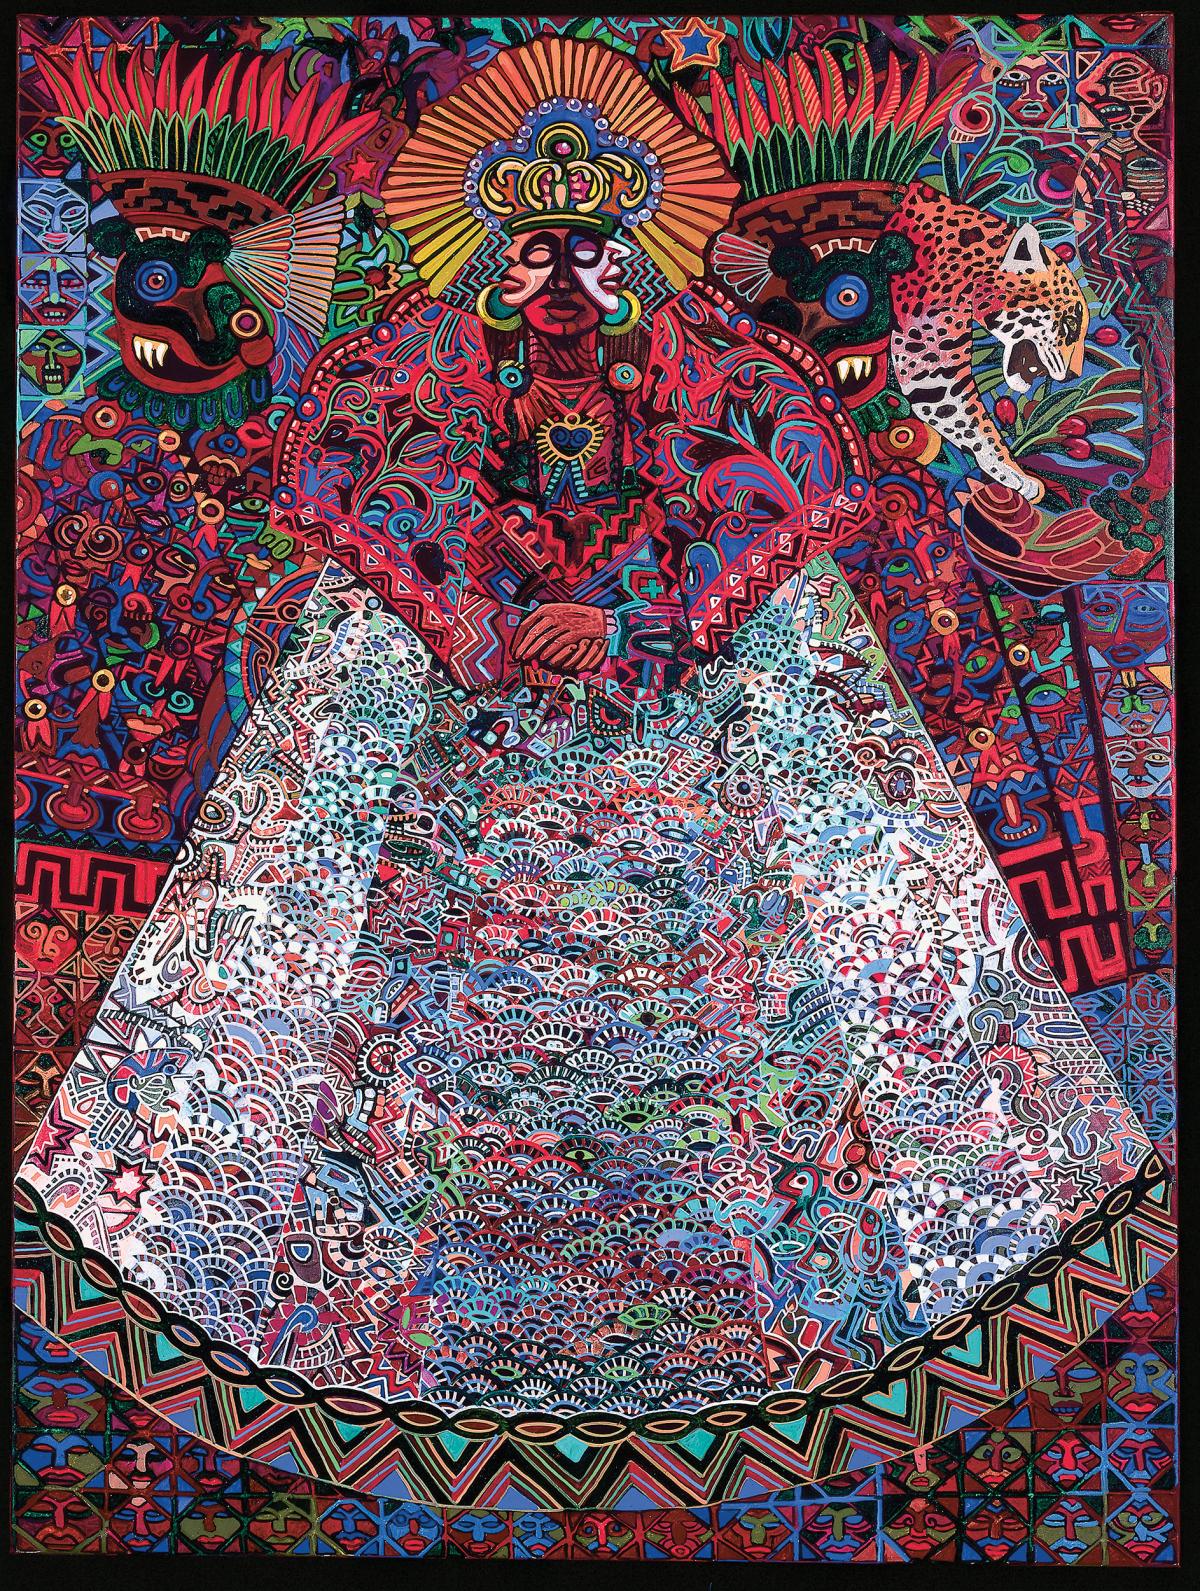 Malinche in a field of Indigenous prints